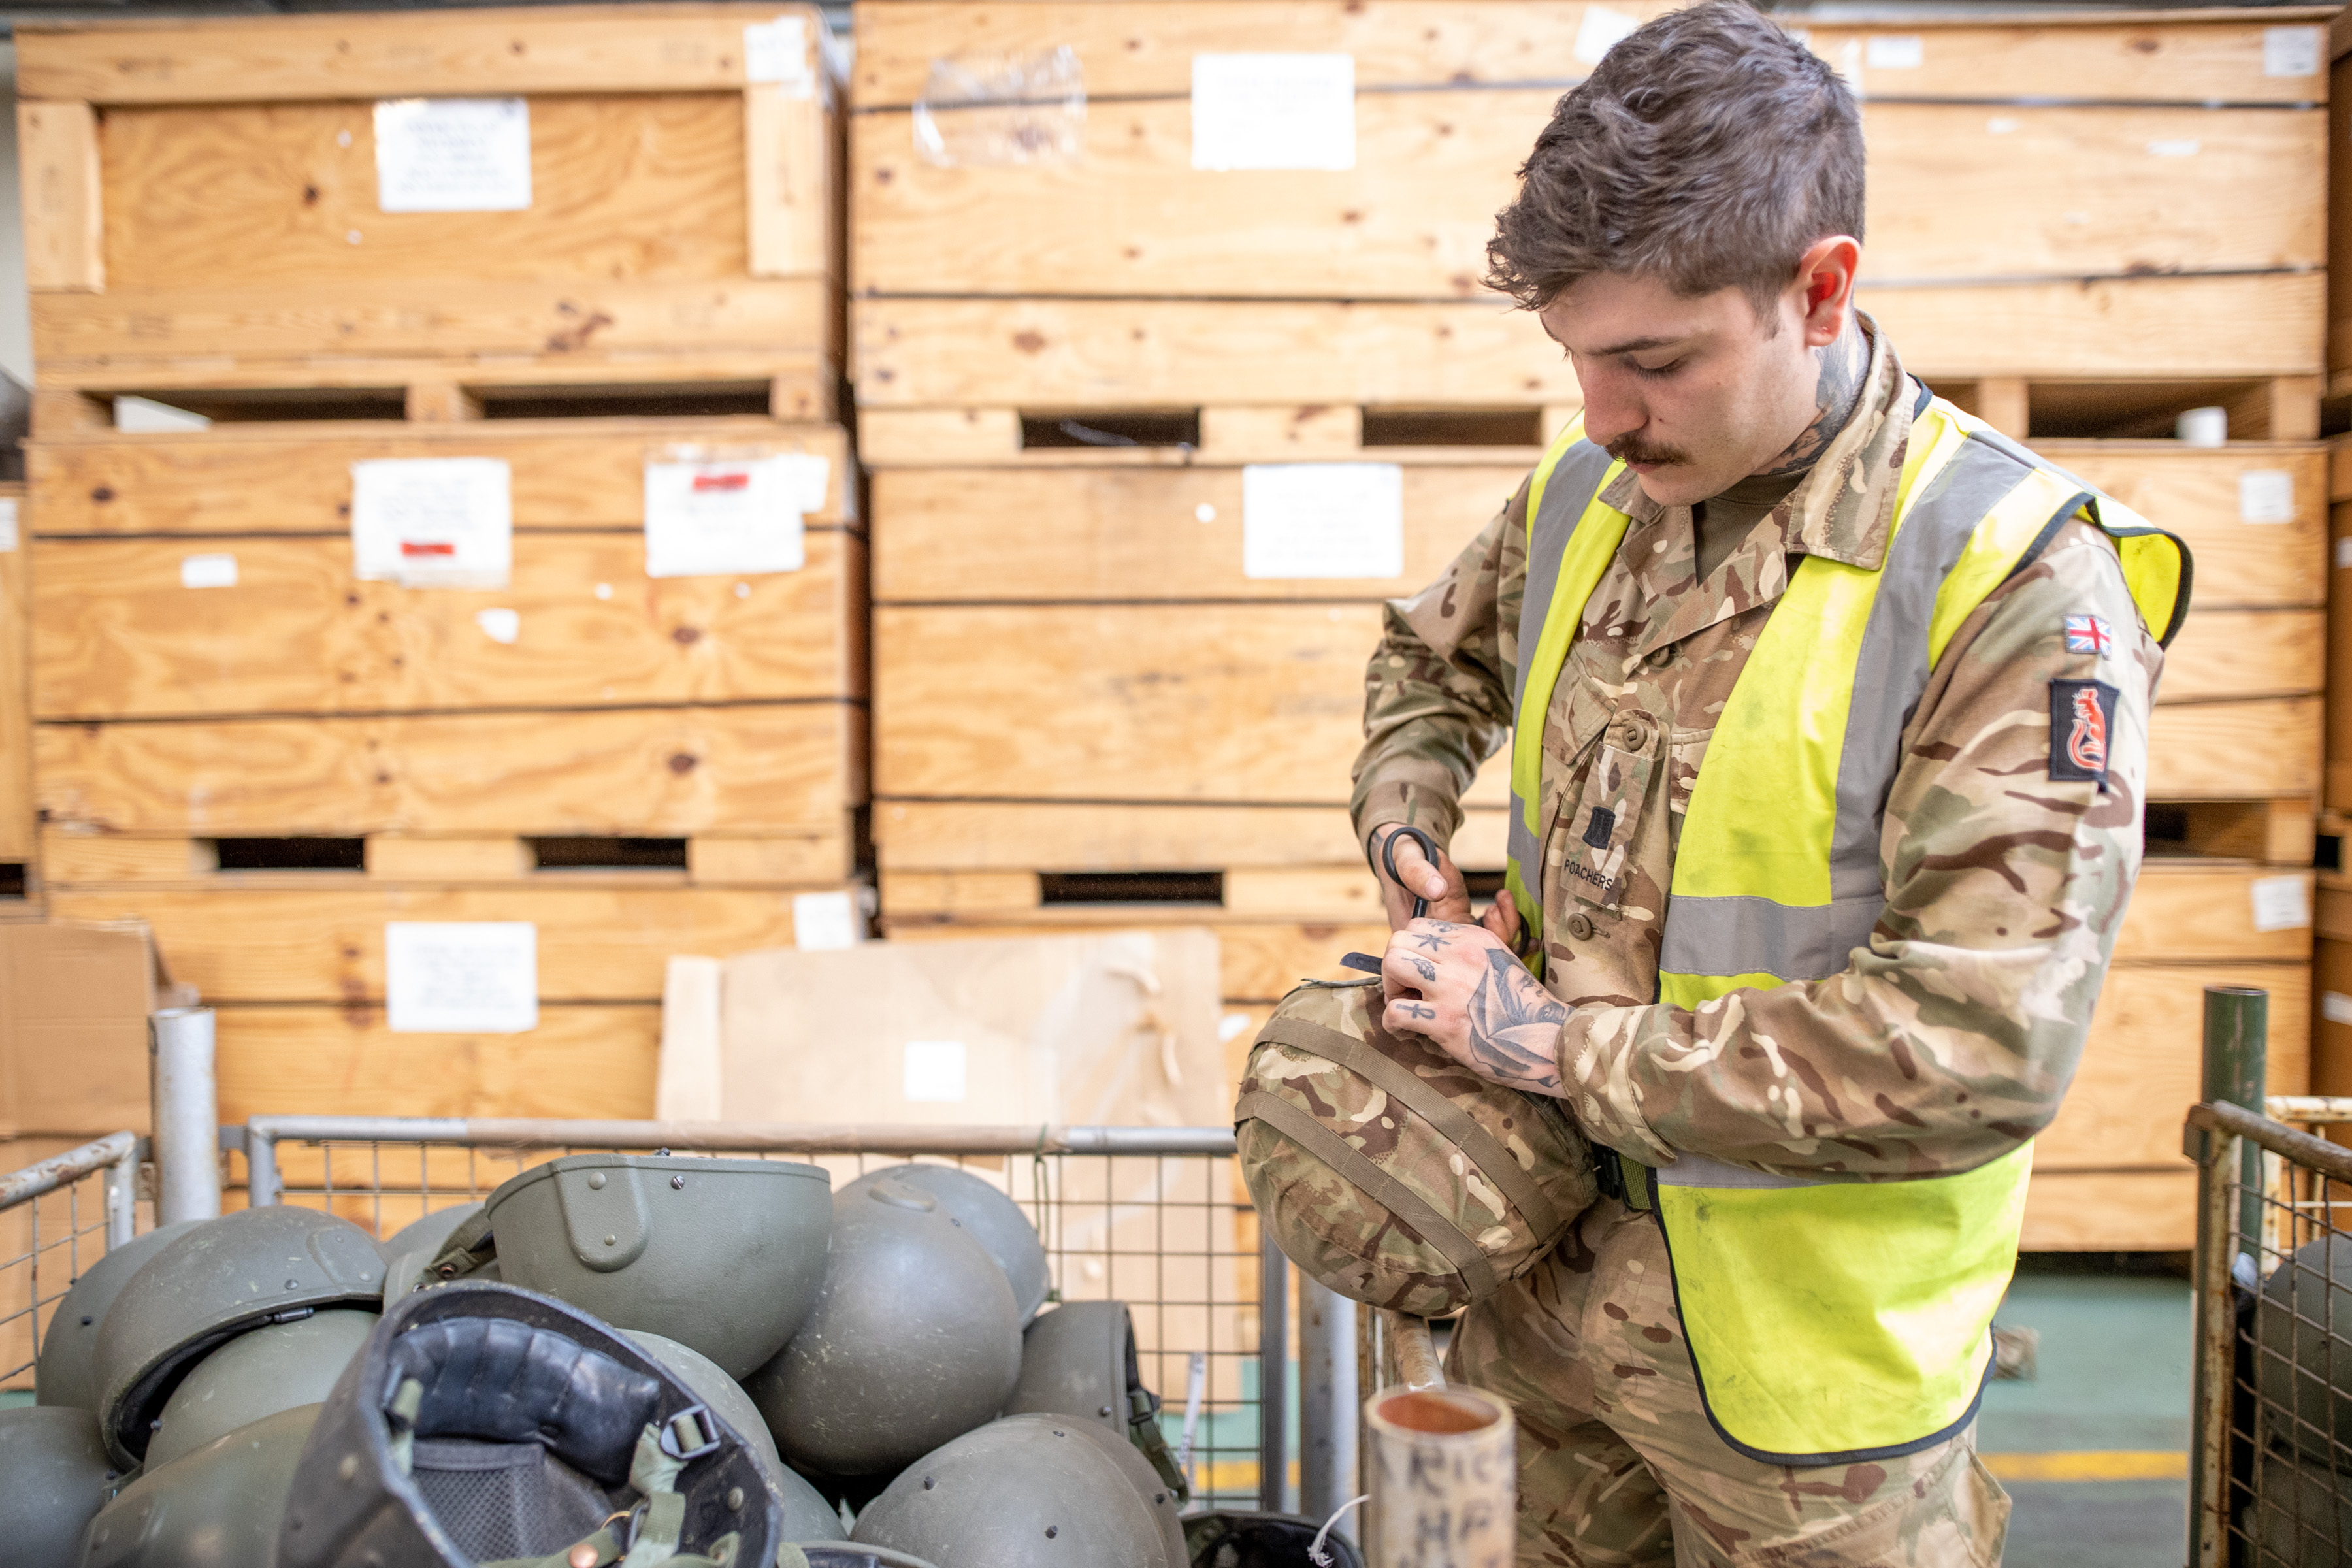 A soldier from 2nd Battalion The Royal Anglian Regiment cuts off the ties of the helmet to prepare it for packaging at MOD Donnington.